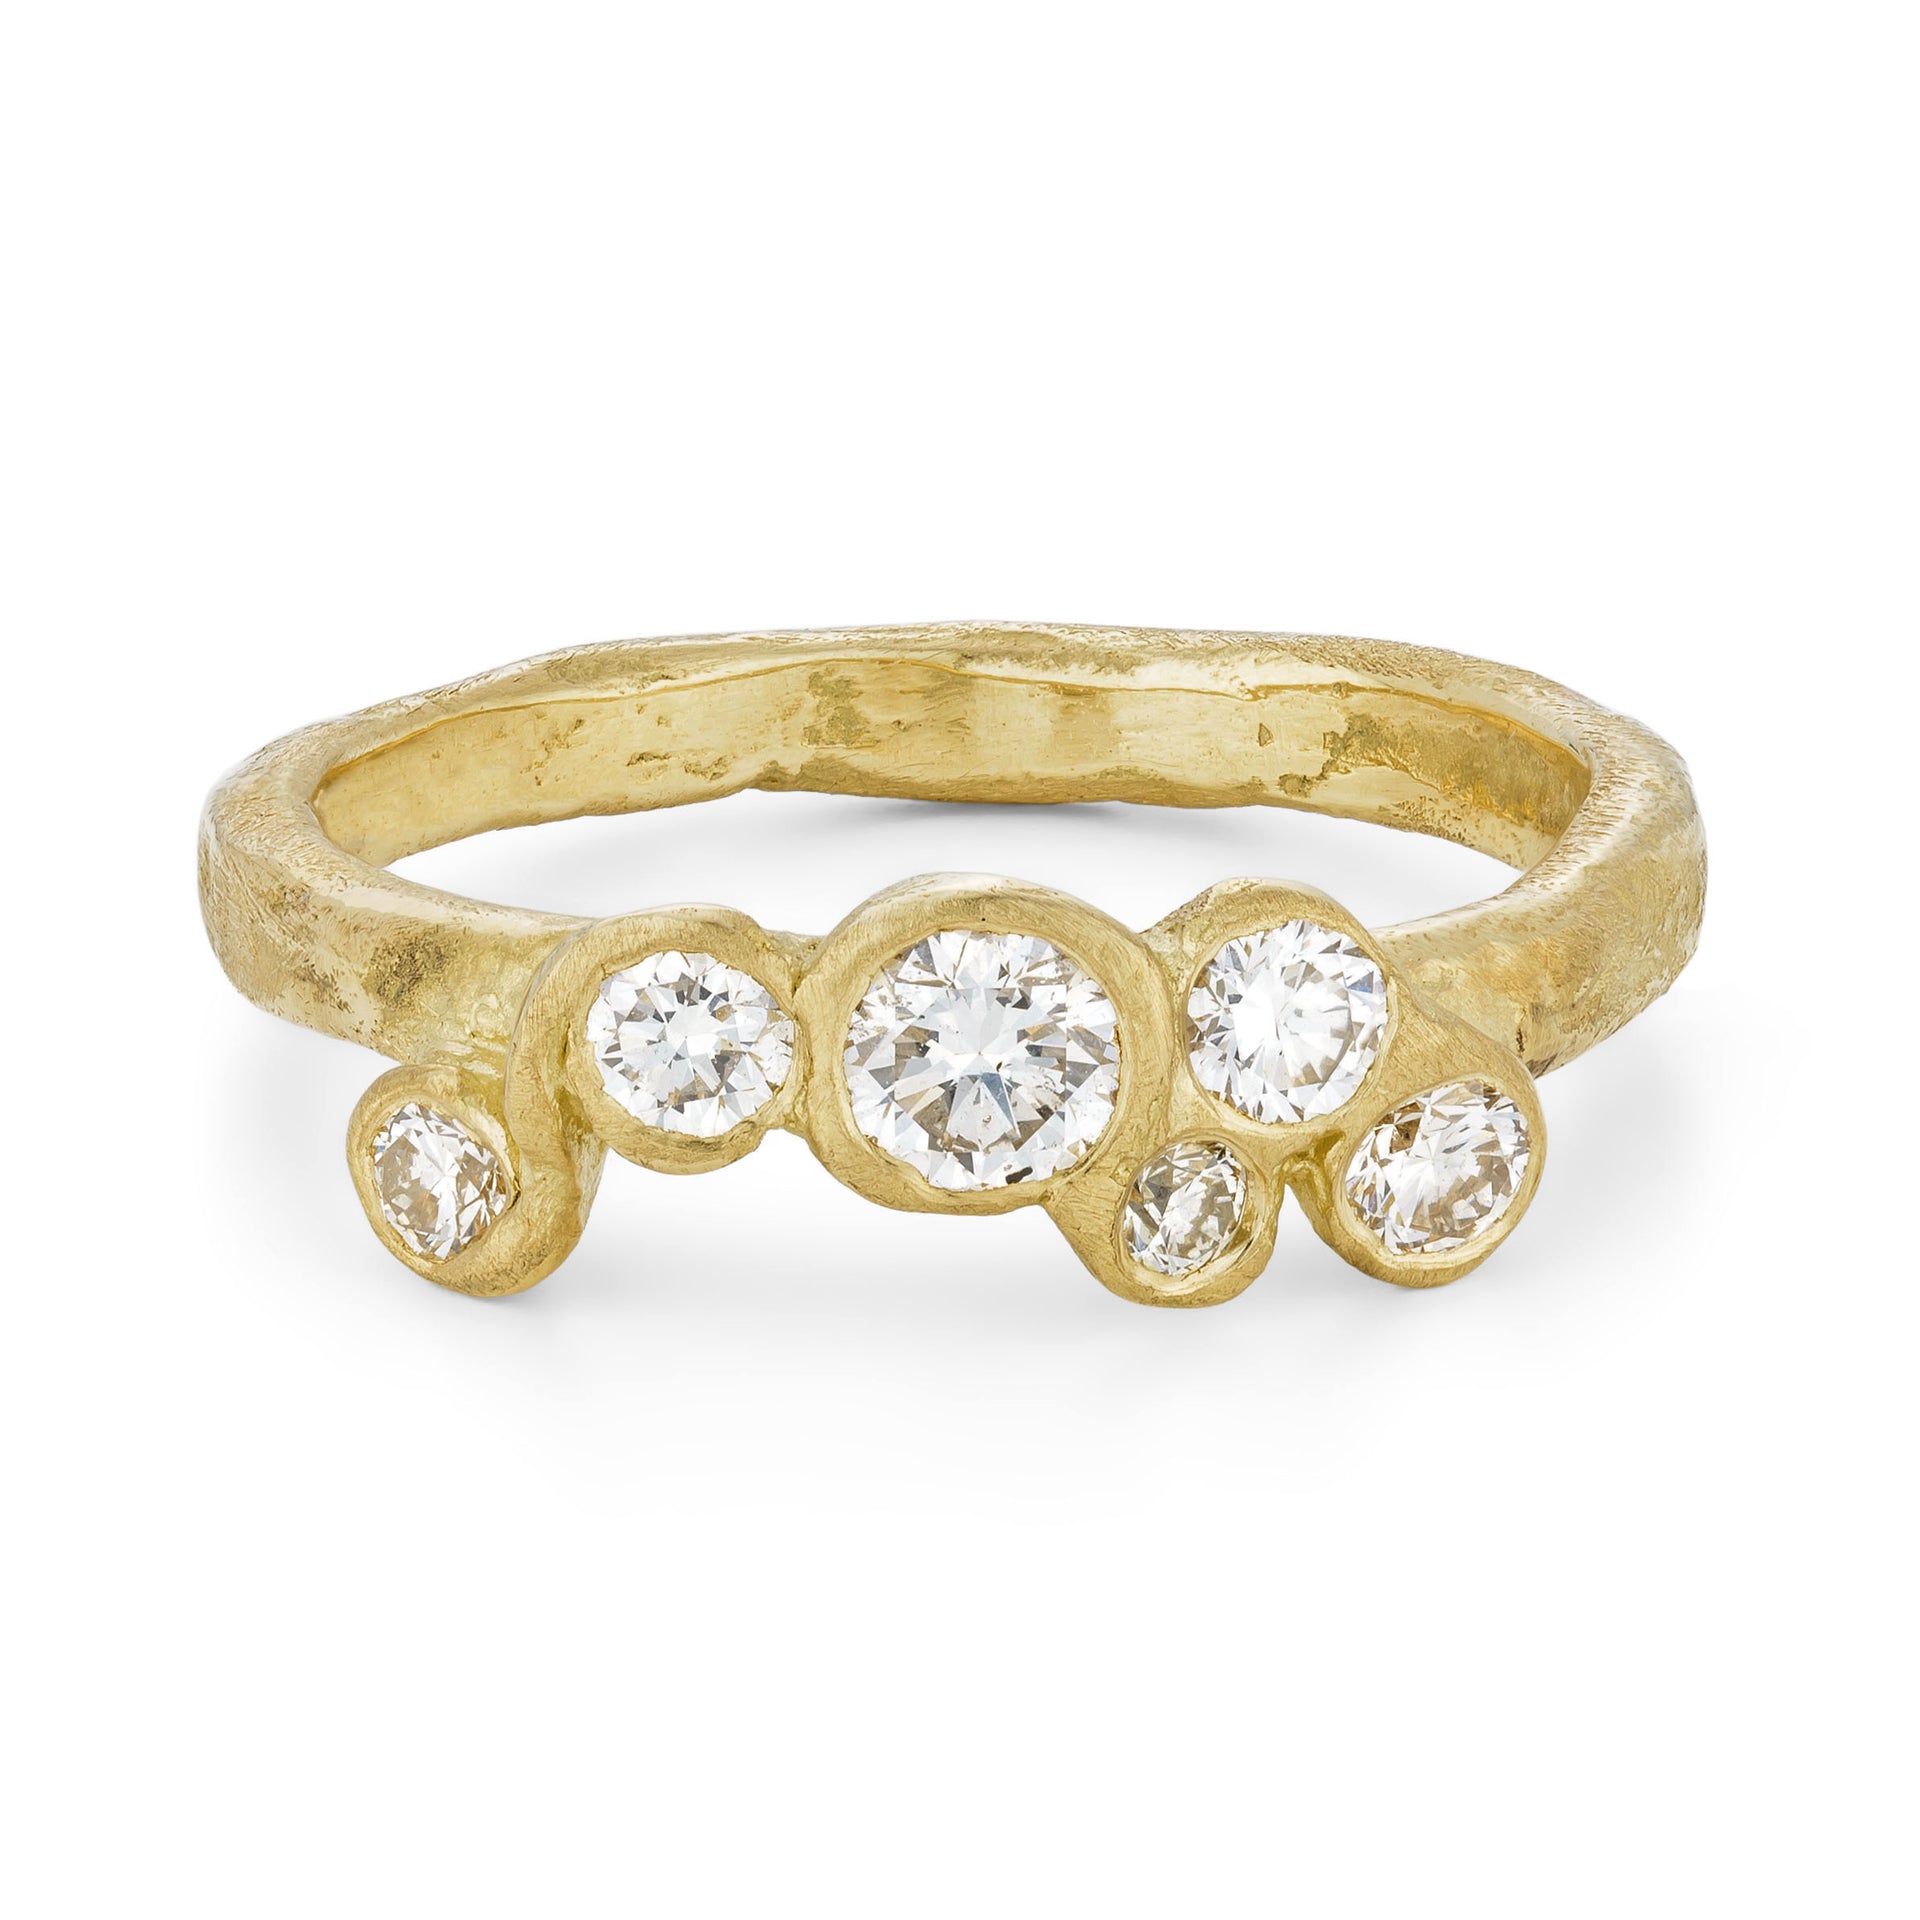 A unique and unusual 18ct gold engagement ring, set with 6 diamonds. This ring has a sea worn texture and has been handcrafted by Emily Nixon in Cornwall.